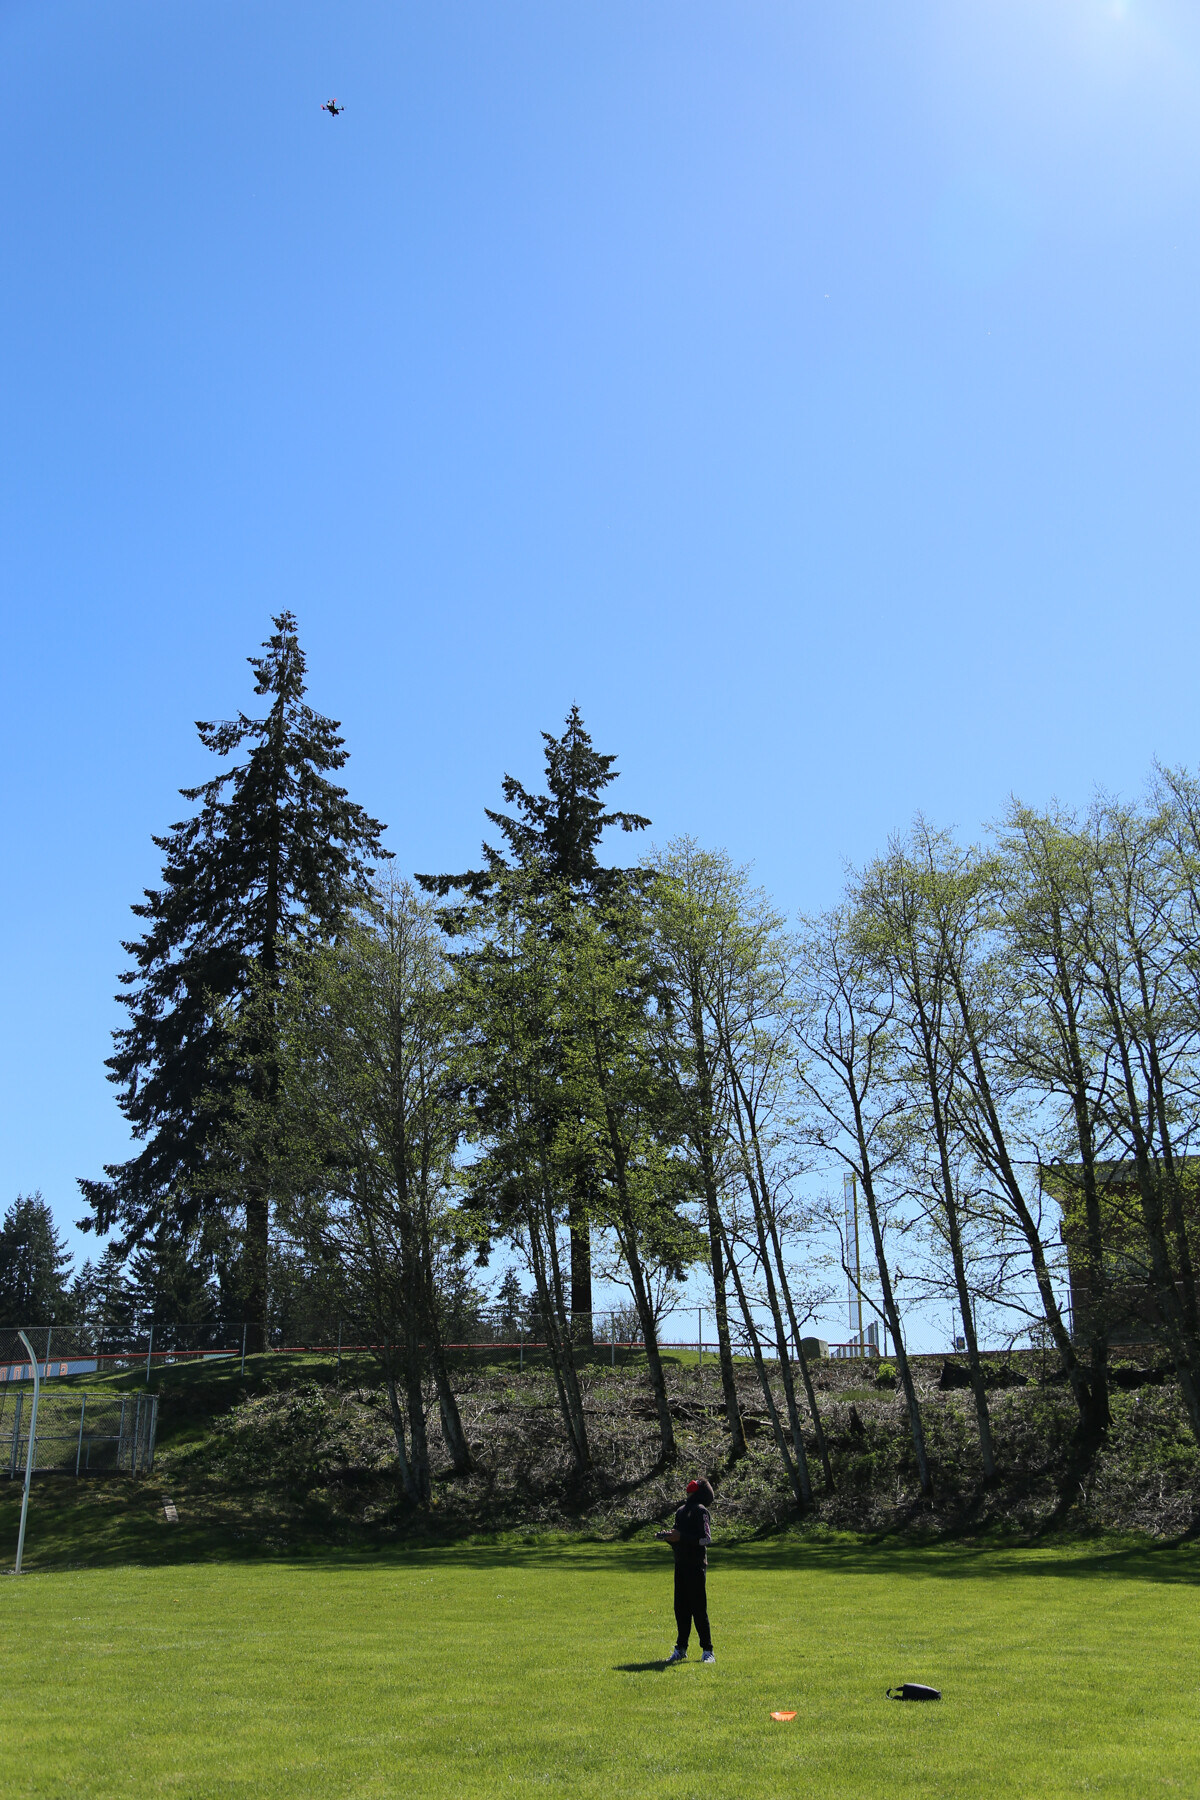 Landan Bryant’s drone climbed into the clear sky, soaring above treetops. Photo courtesy of Ridgefield School District